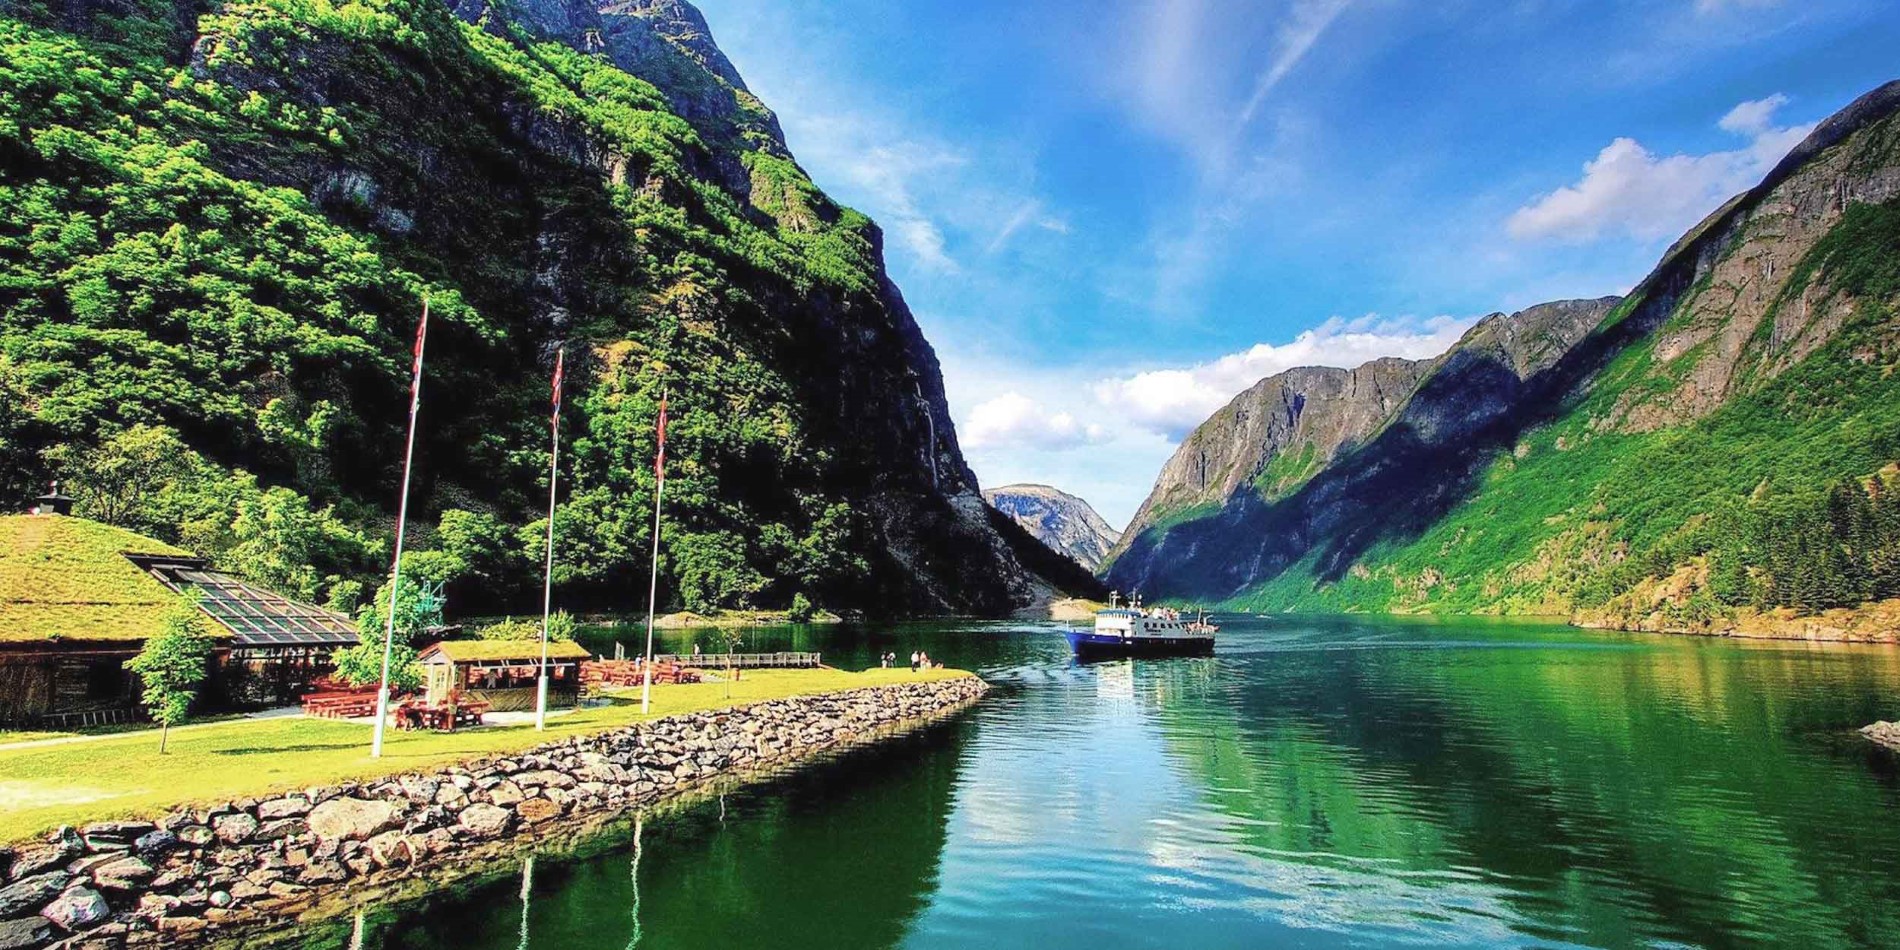 A body of water with Nærøyfjord in the background